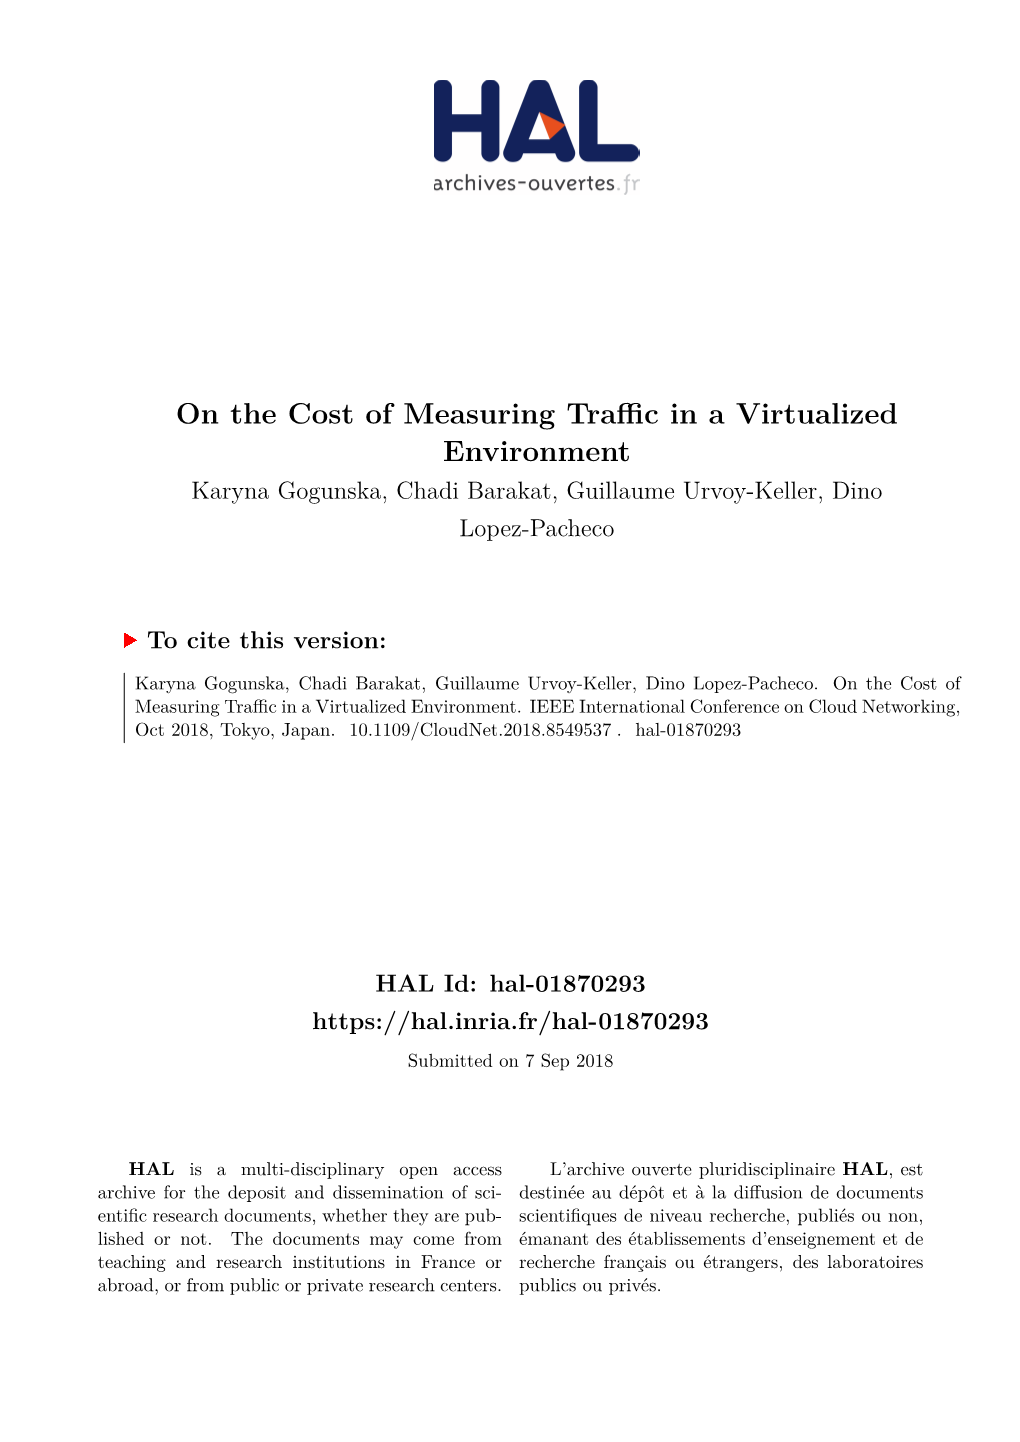 On the Cost of Measuring Traffic in a Virtualized Environment